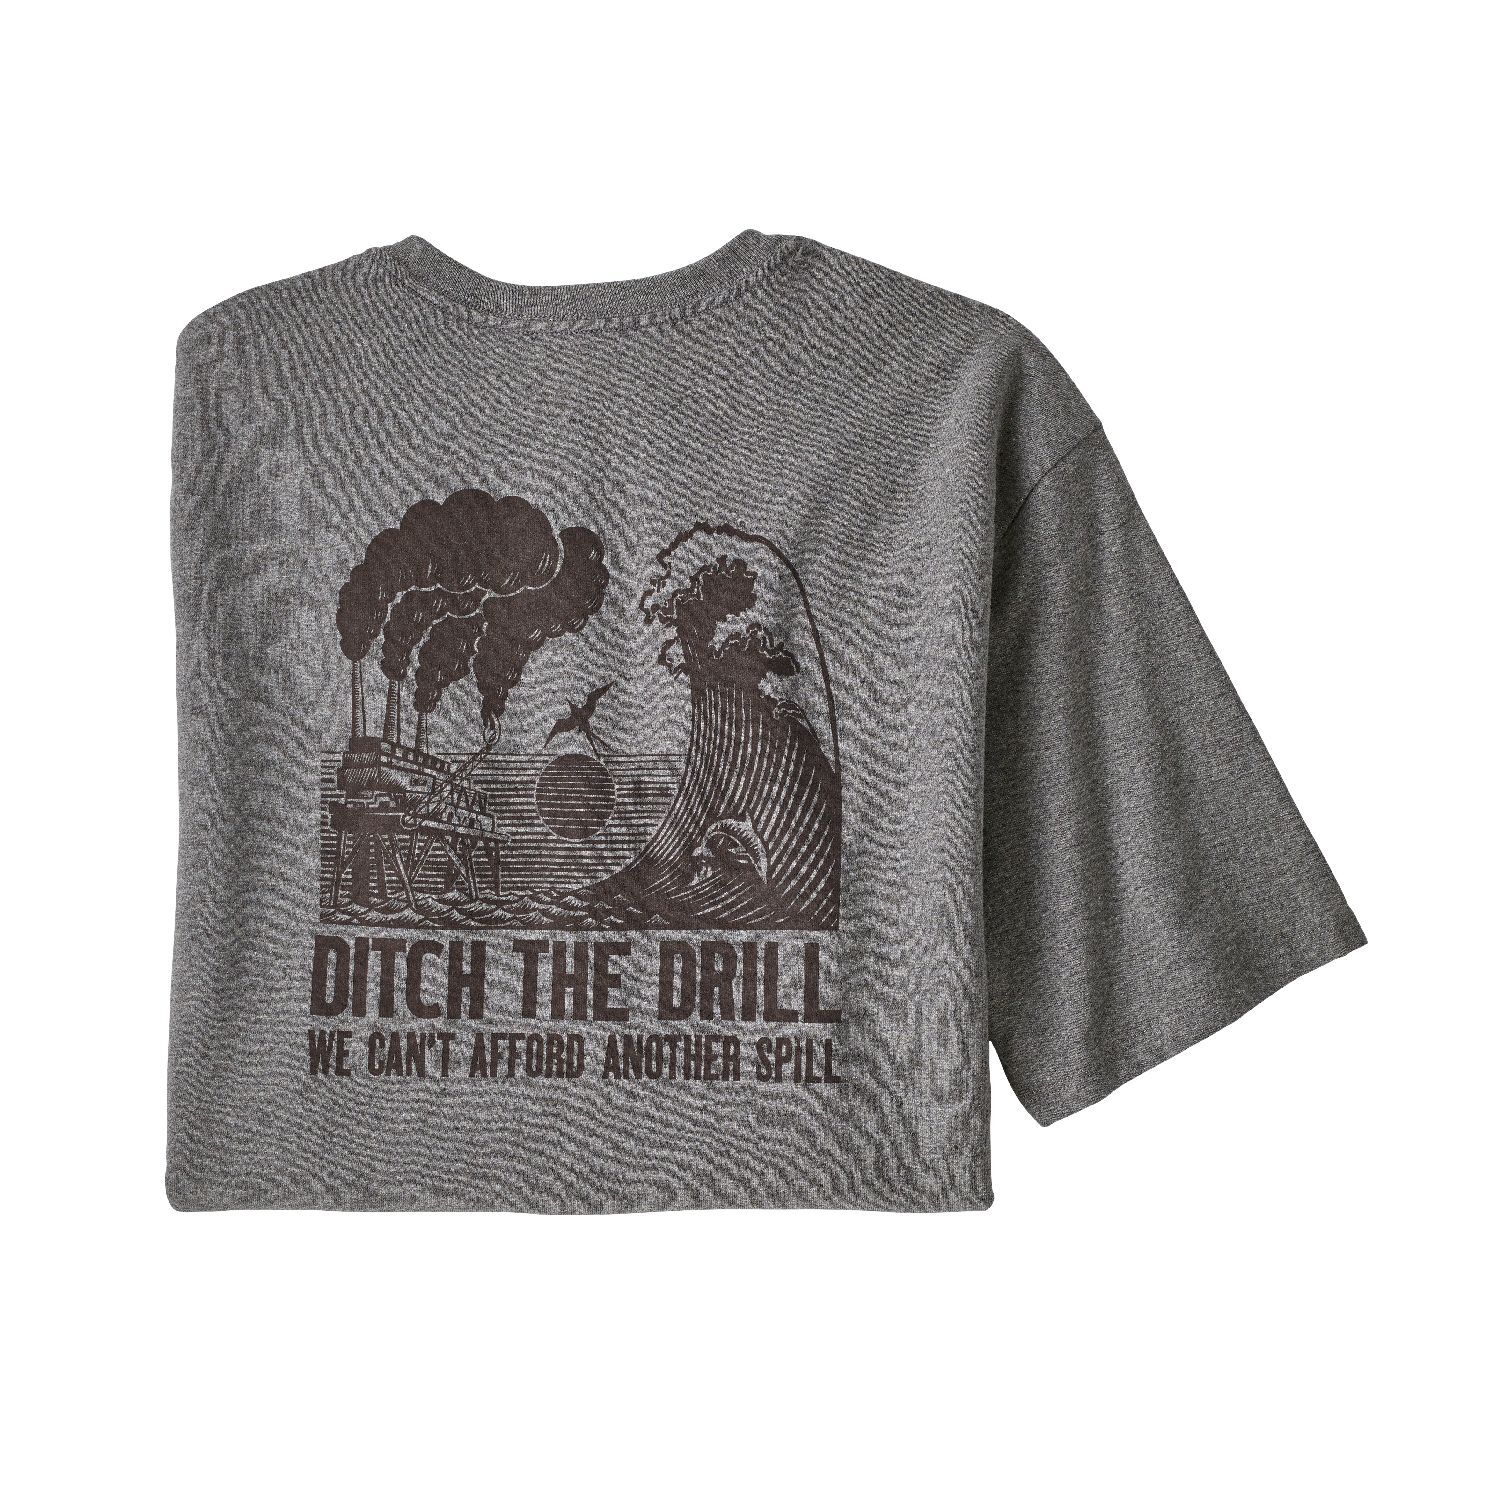 Patagonia Ditch The Drill Responsibili-Tee - Camiseta - Hombre